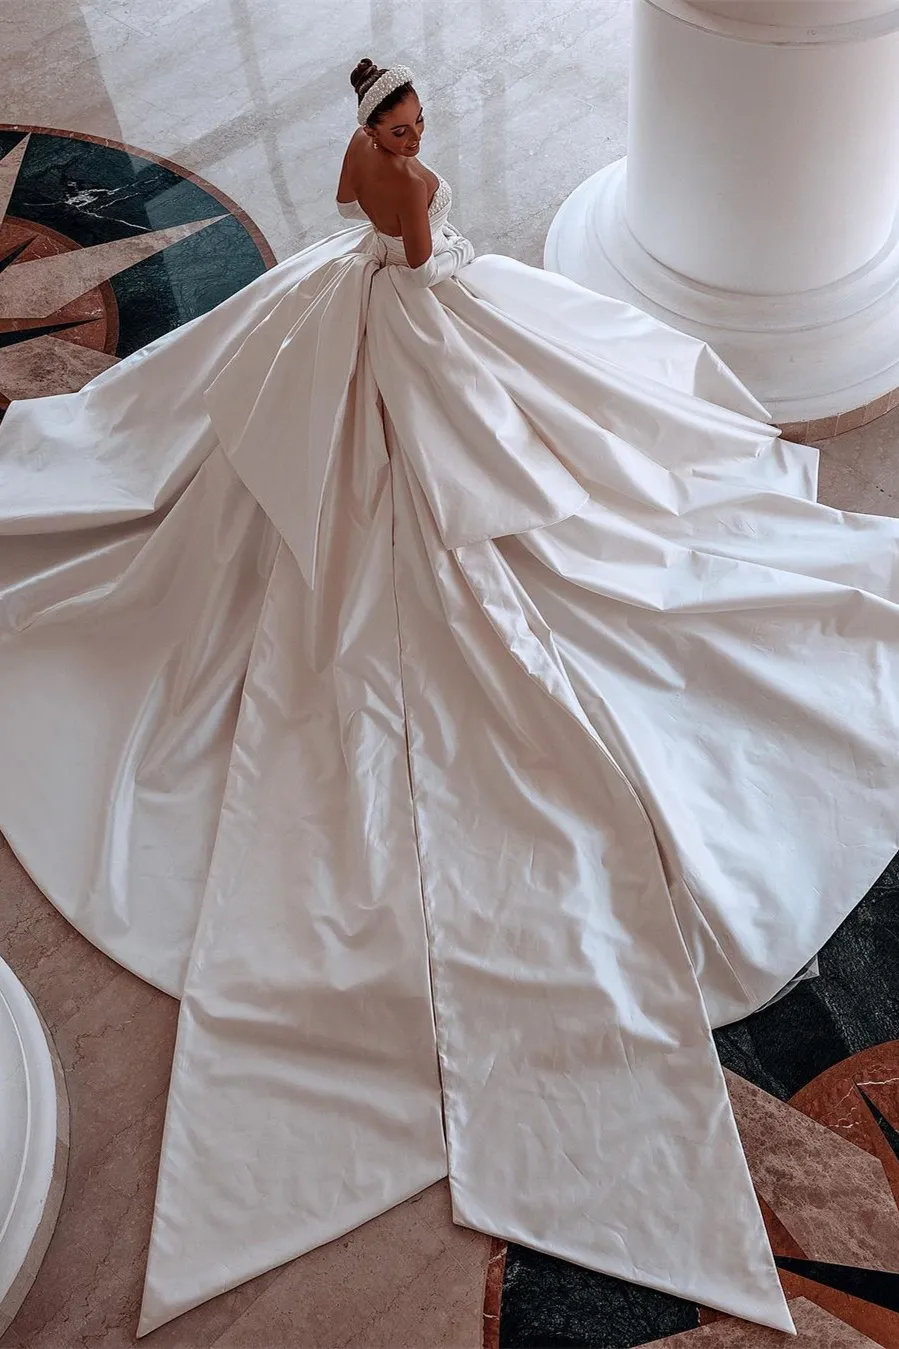 Royal Ivory Satin Dubai Arabic Wedding Dresses Sexy Beads Strapless Backless Ruched Long Train Bridal Gowns With Big Bow Robes BC14905